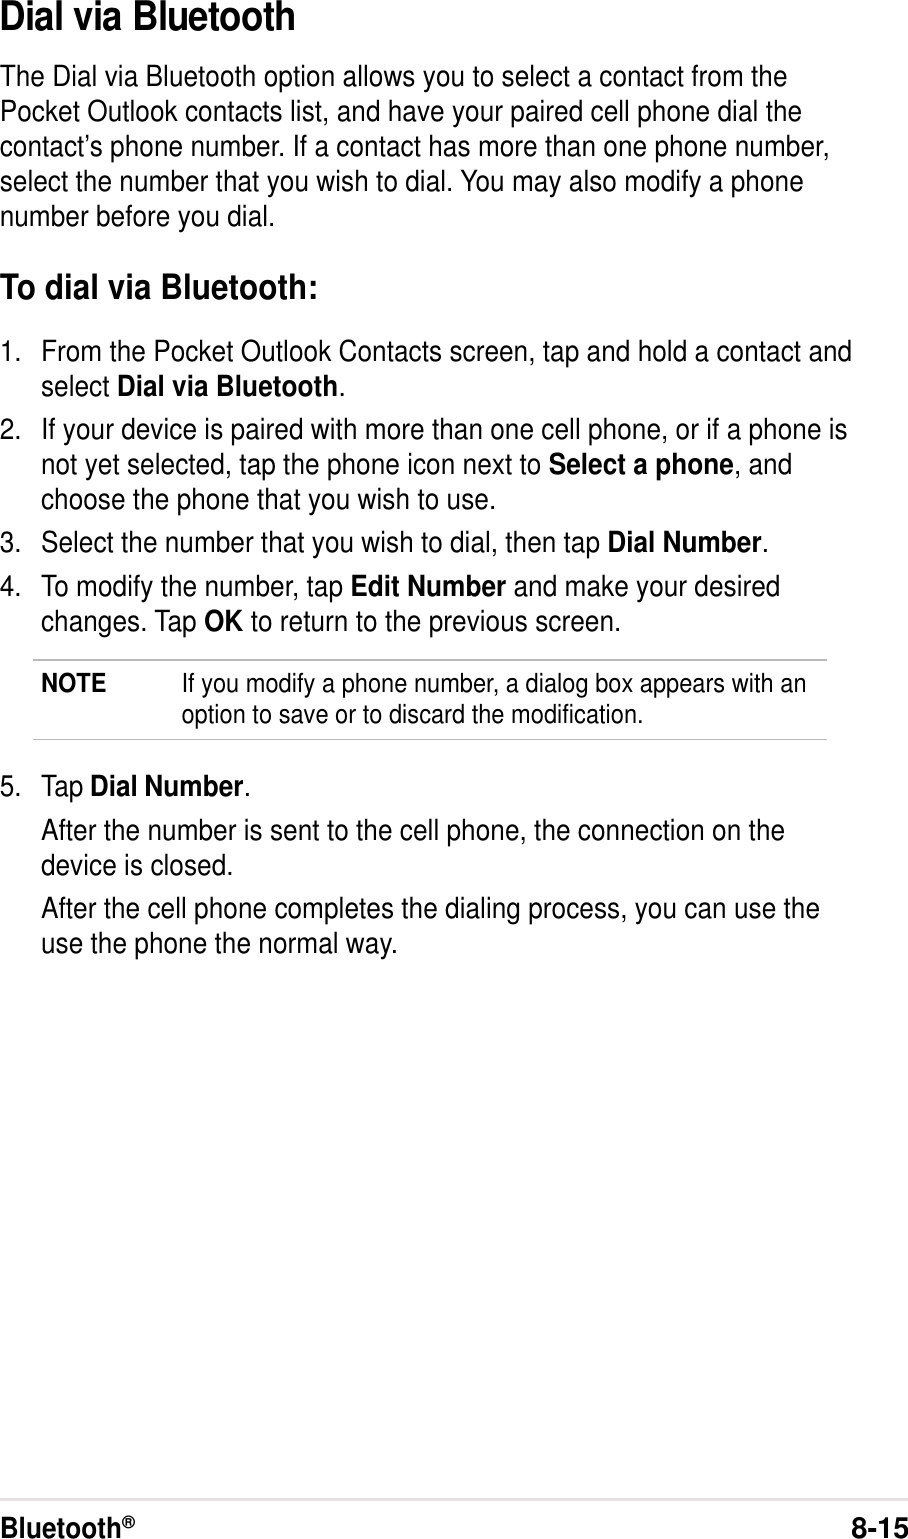 Bluetooth®8-15Dial via BluetoothThe Dial via Bluetooth option allows you to select a contact from thePocket Outlook contacts list, and have your paired cell phone dial thecontact’s phone number. If a contact has more than one phone number,select the number that you wish to dial. You may also modify a phonenumber before you dial.To dial via Bluetooth:1. From the Pocket Outlook Contacts screen, tap and hold a contact andselect Dial via Bluetooth.2. If your device is paired with more than one cell phone, or if a phone isnot yet selected, tap the phone icon next to Select a phone, andchoose the phone that you wish to use.3. Select the number that you wish to dial, then tap Dial Number.4. To modify the number, tap Edit Number and make your desiredchanges. Tap OK to return to the previous screen.NOTE If you modify a phone number, a dialog box appears with anoption to save or to discard the modification.5. Tap Dial Number.After the number is sent to the cell phone, the connection on thedevice is closed.After the cell phone completes the dialing process, you can use theuse the phone the normal way.